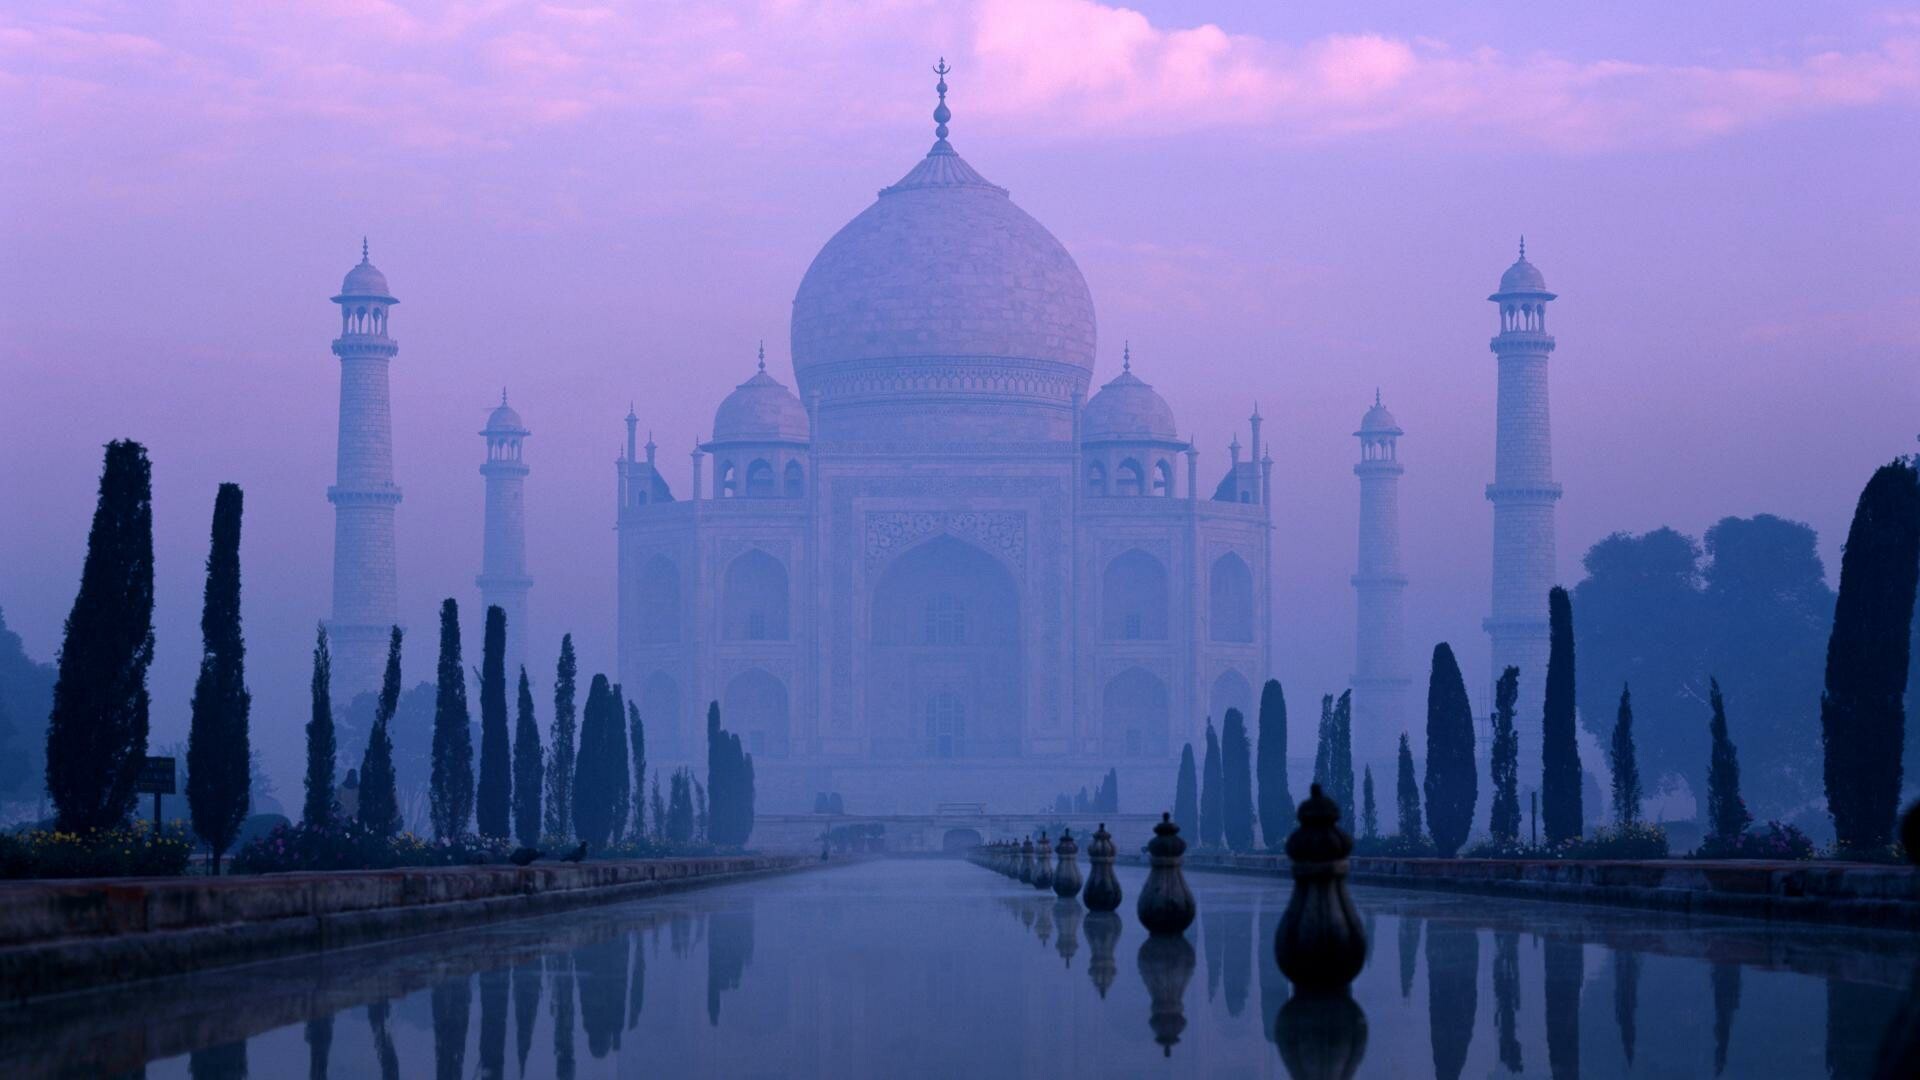 India Photos, Download The BEST Free India Stock Photos & HD Images